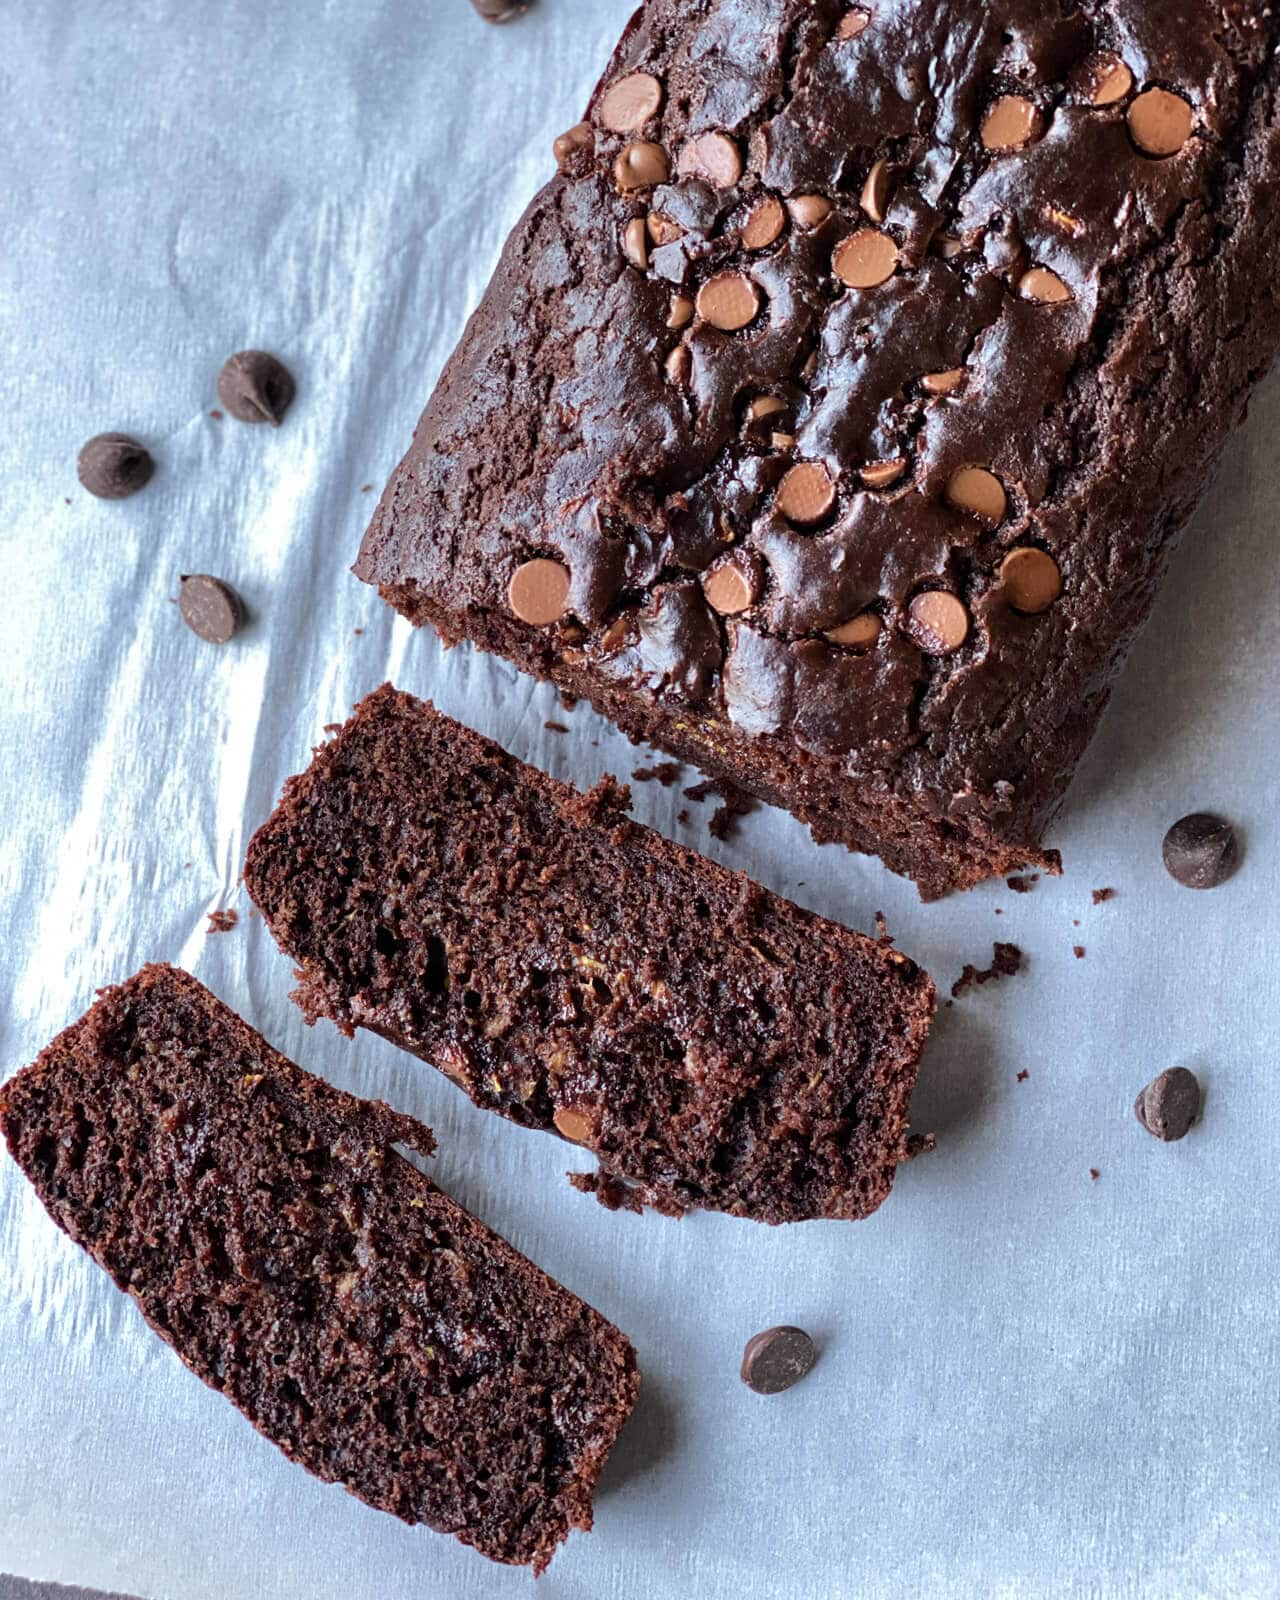 A loaf of double chocolate zucchini bread with two slices laying in front on a sheet of parchment paper.